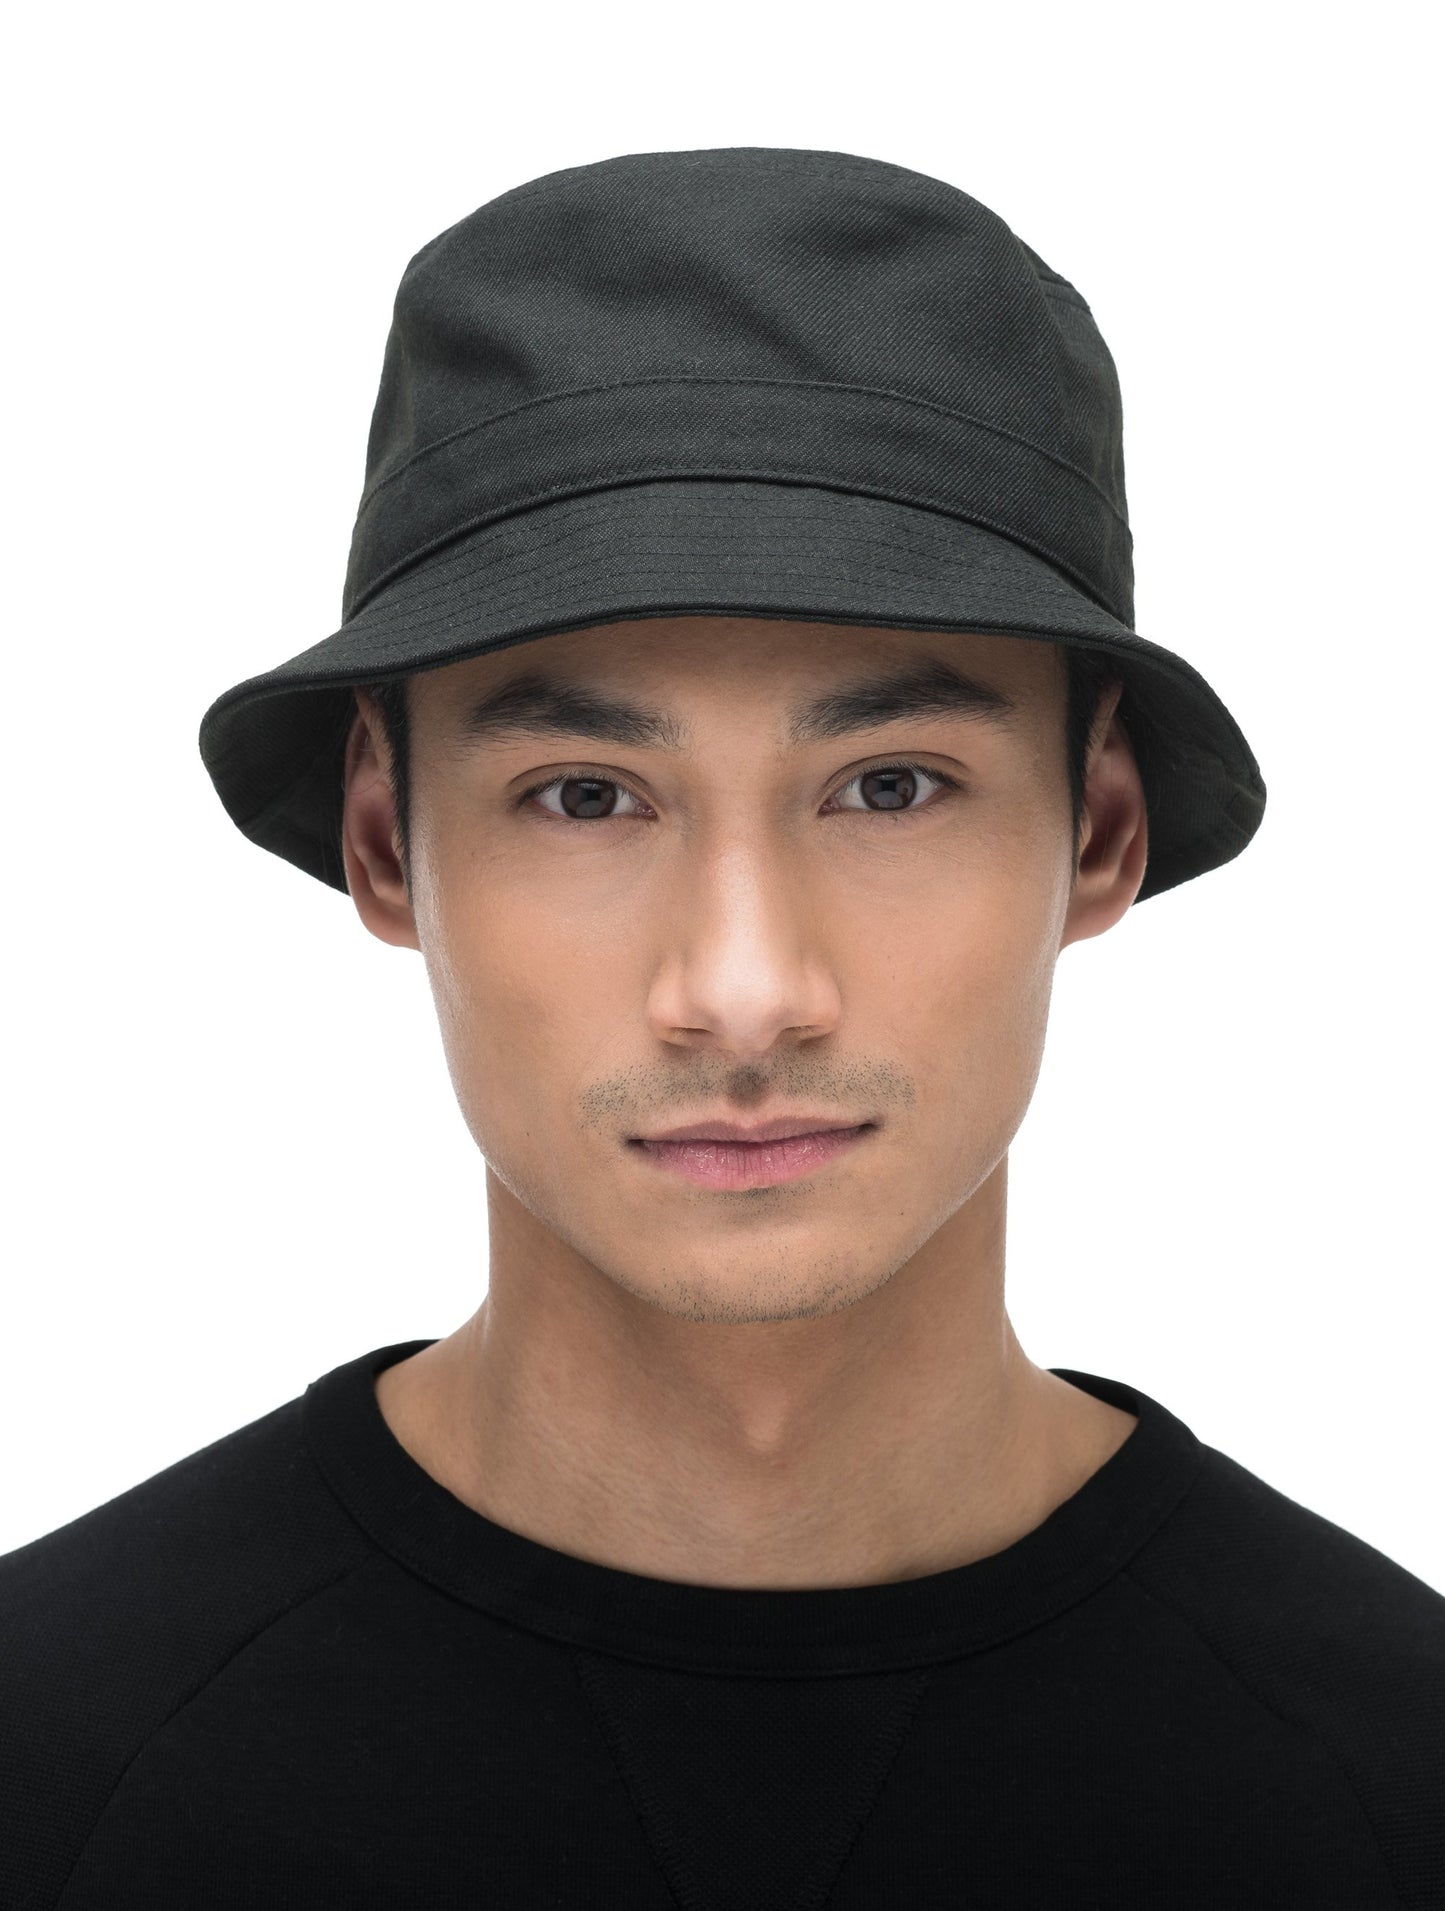 Oasis Classic Flat Top Bucket Hat / Black / One Size